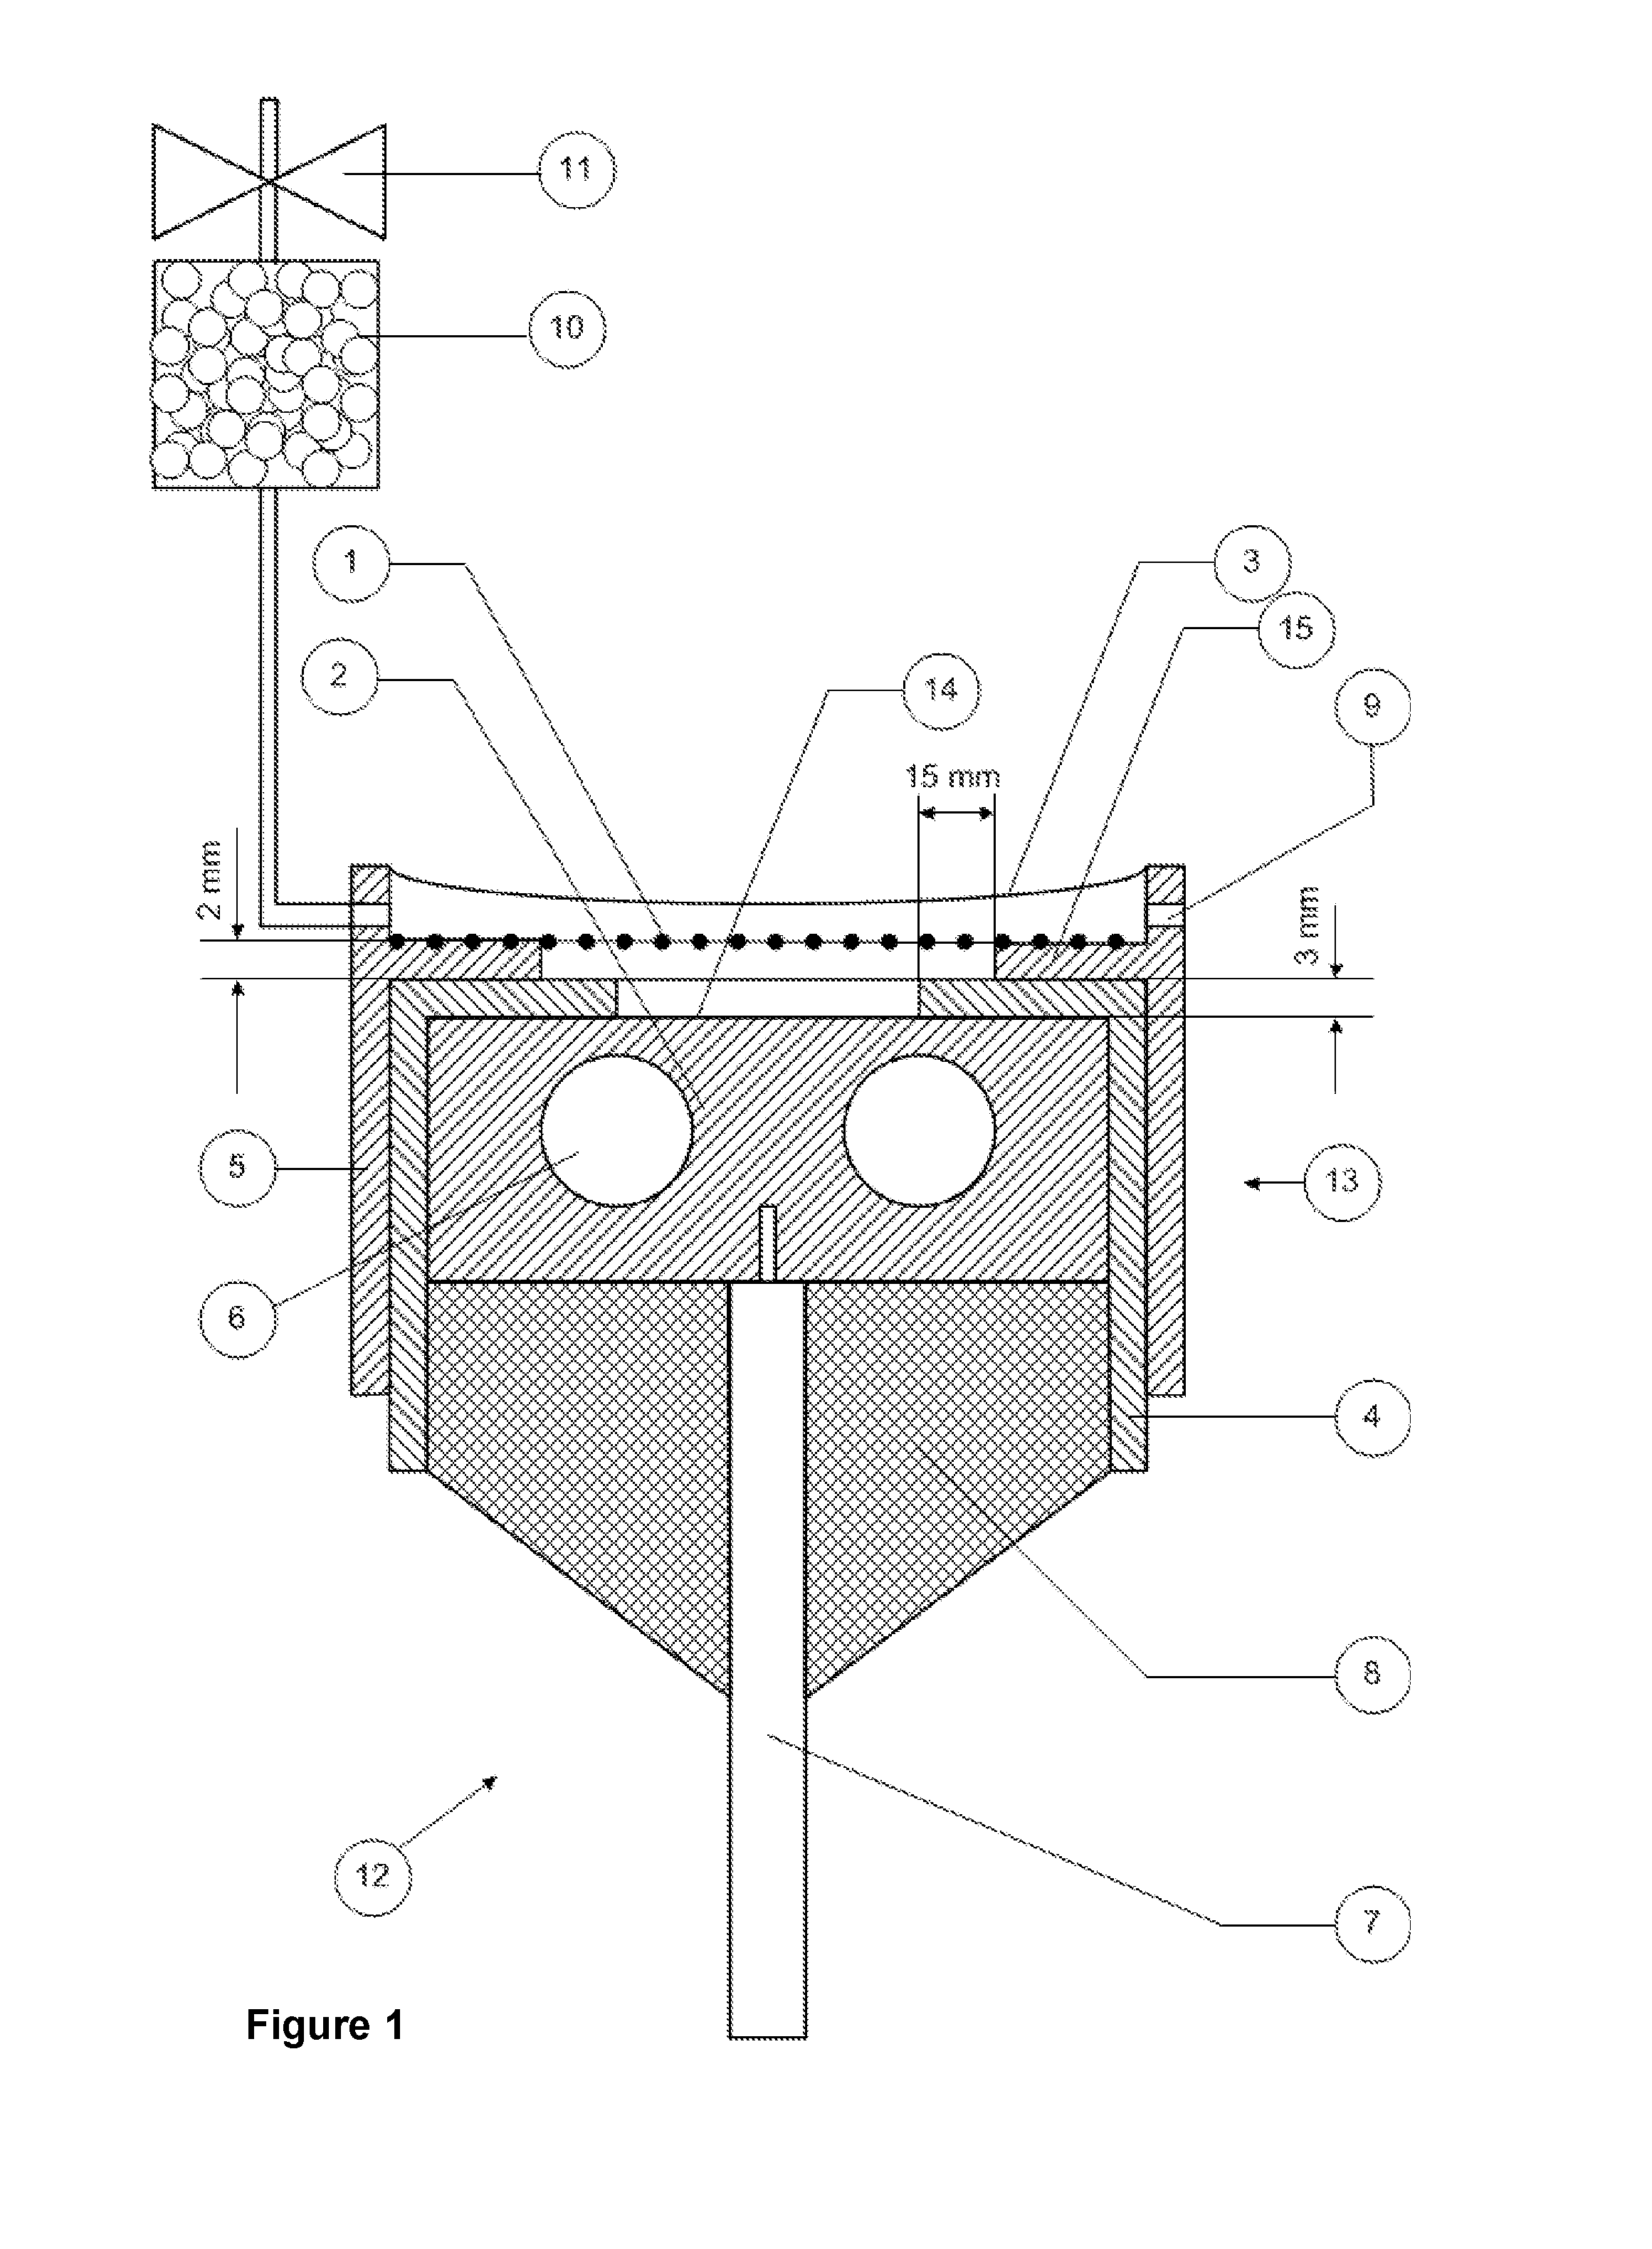 Apparatus for the generation of low-energy x-rays